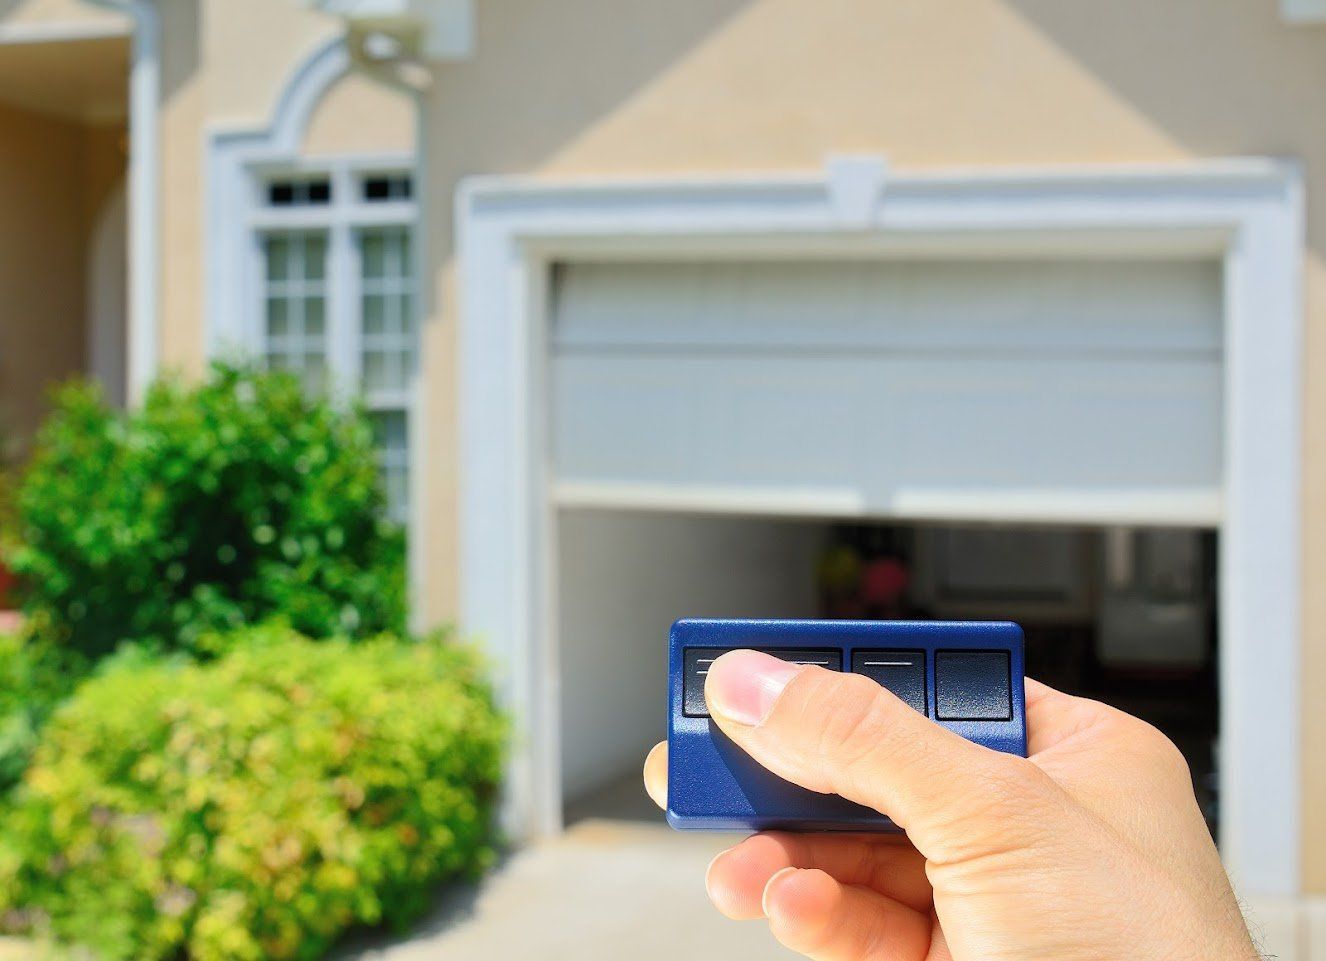 A Person Is Holding a Remote Control in Front of A Garage Door